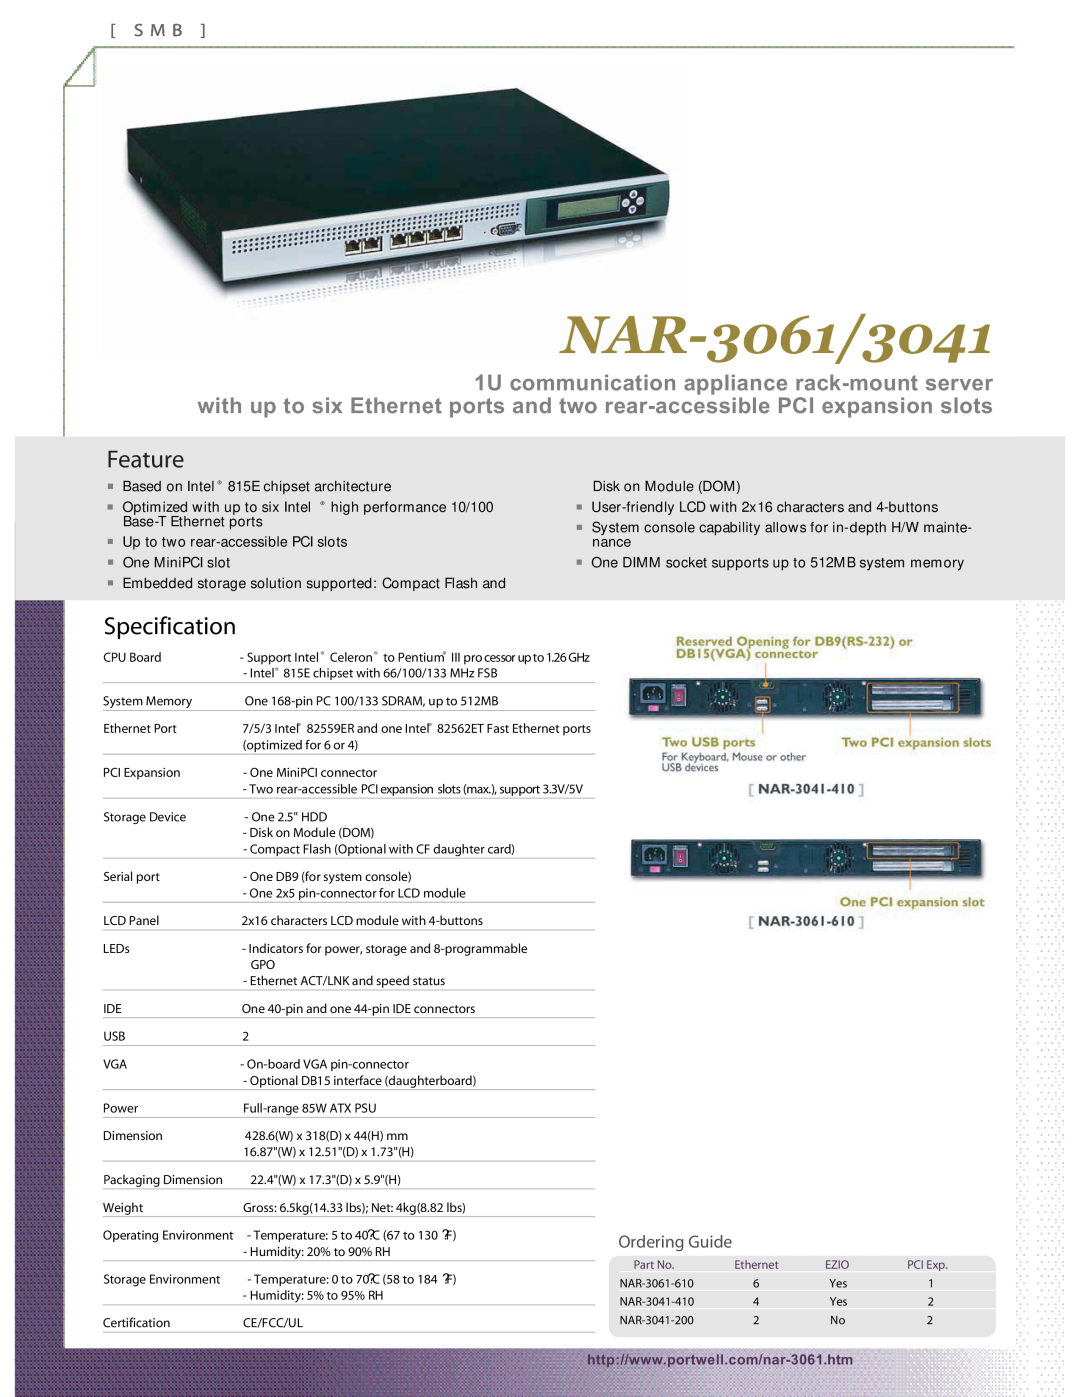 Intel manual NAR-3061/3041, Feature, Specification, S M B, Ordering Guide, Based on Intel 815E chipset architecture 